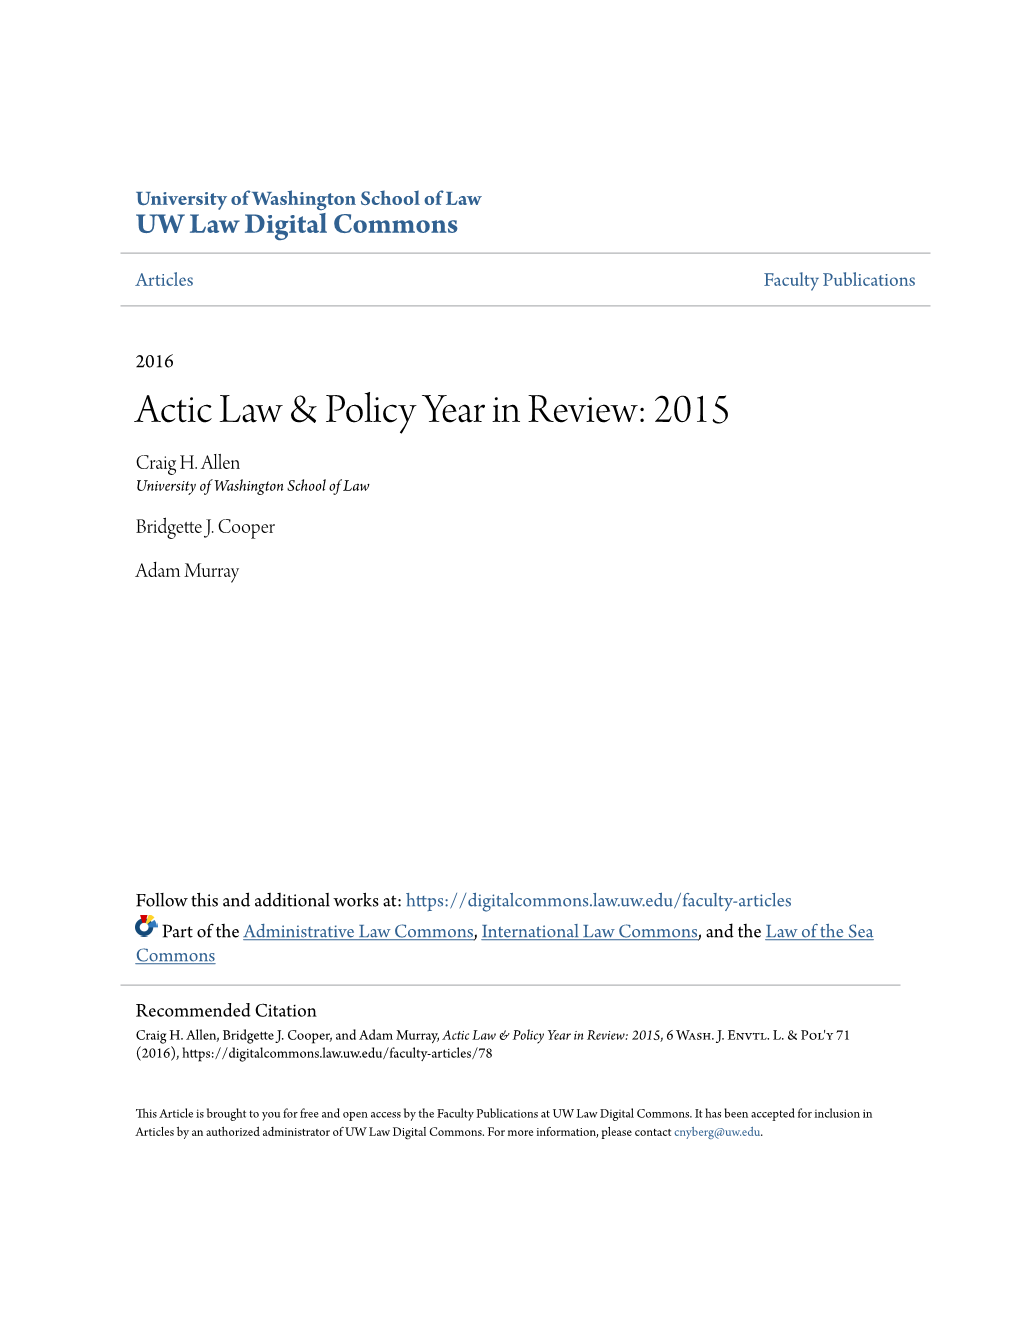 Actic Law & Policy Year in Review: 2015